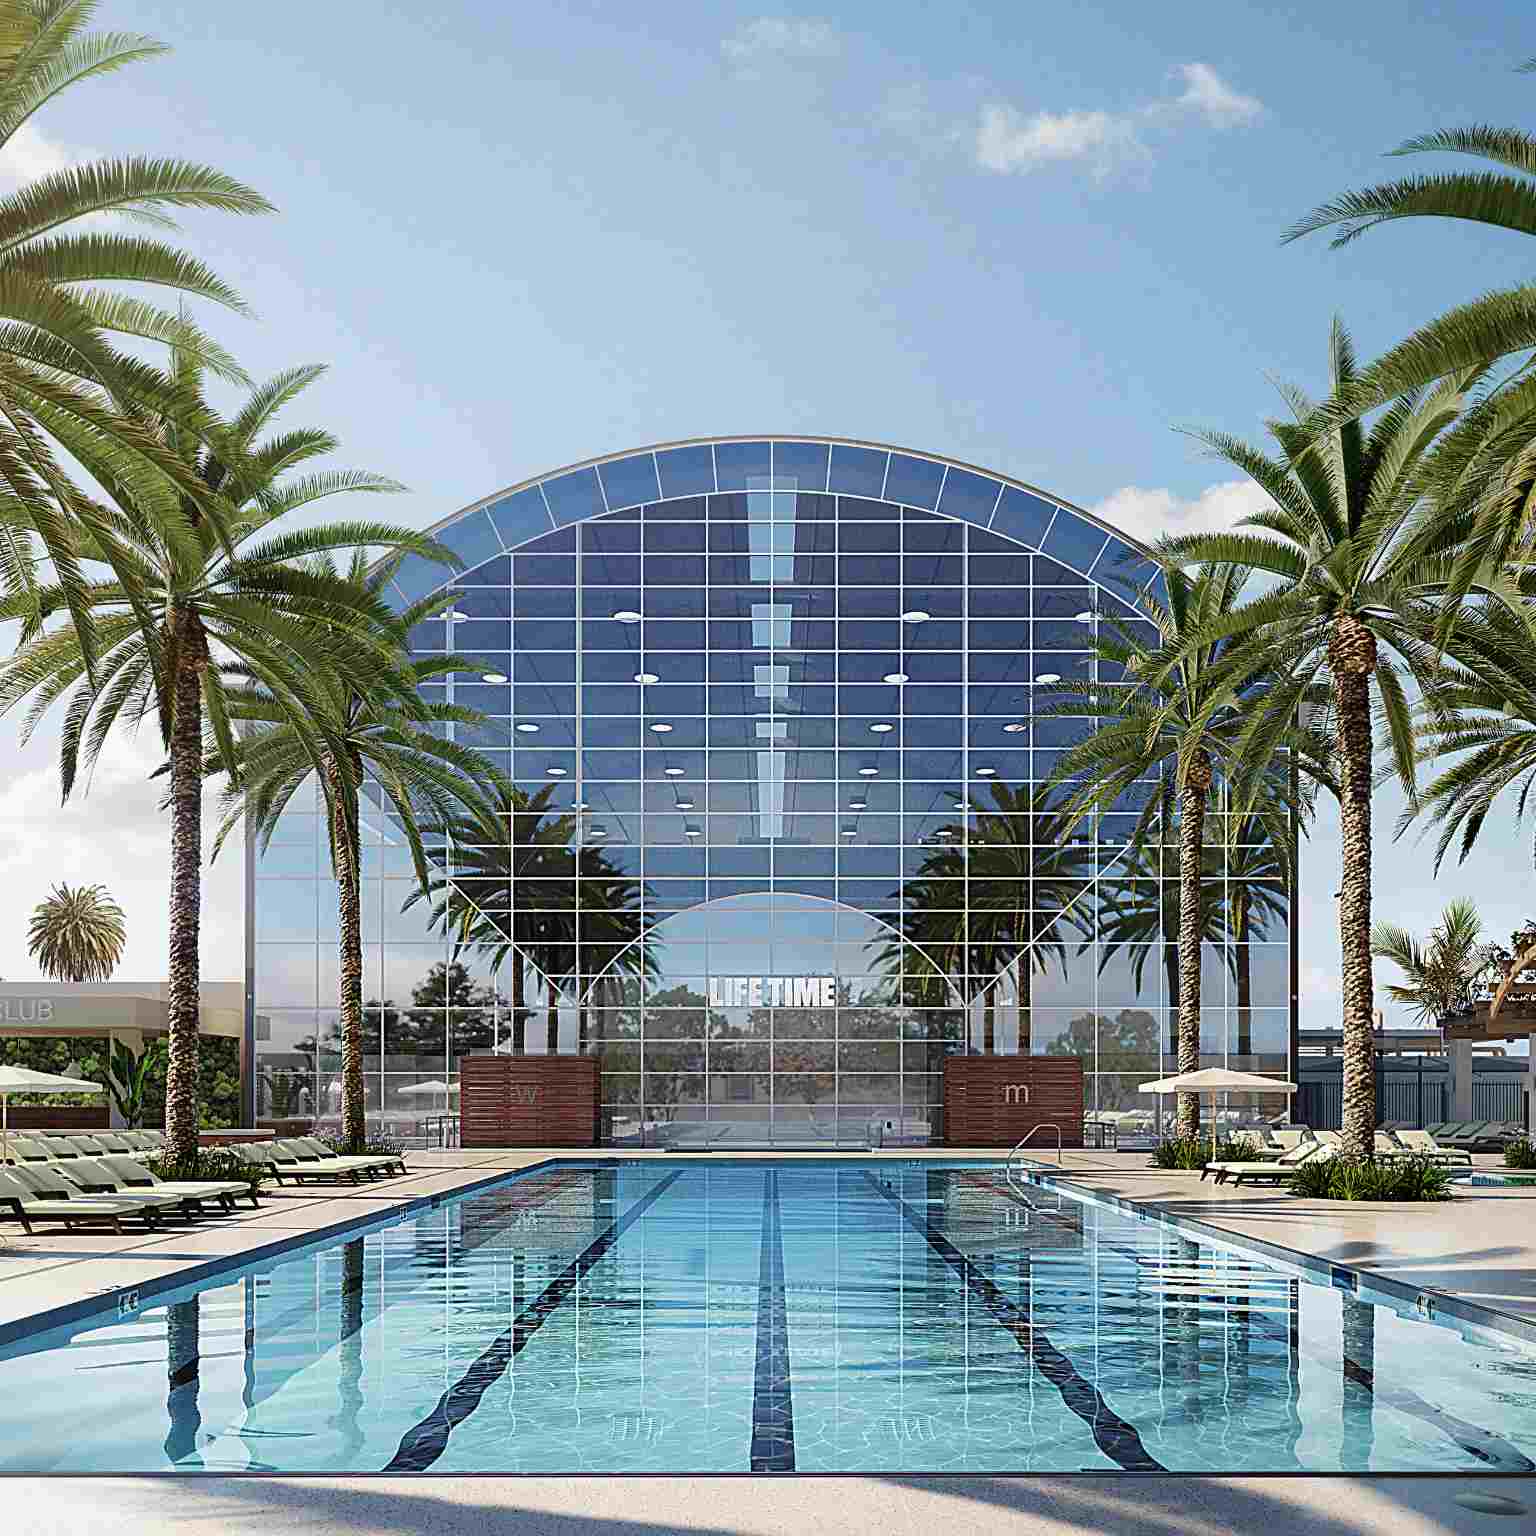 Exterior of a Life Time building with an outdoor pool lined with palm trees